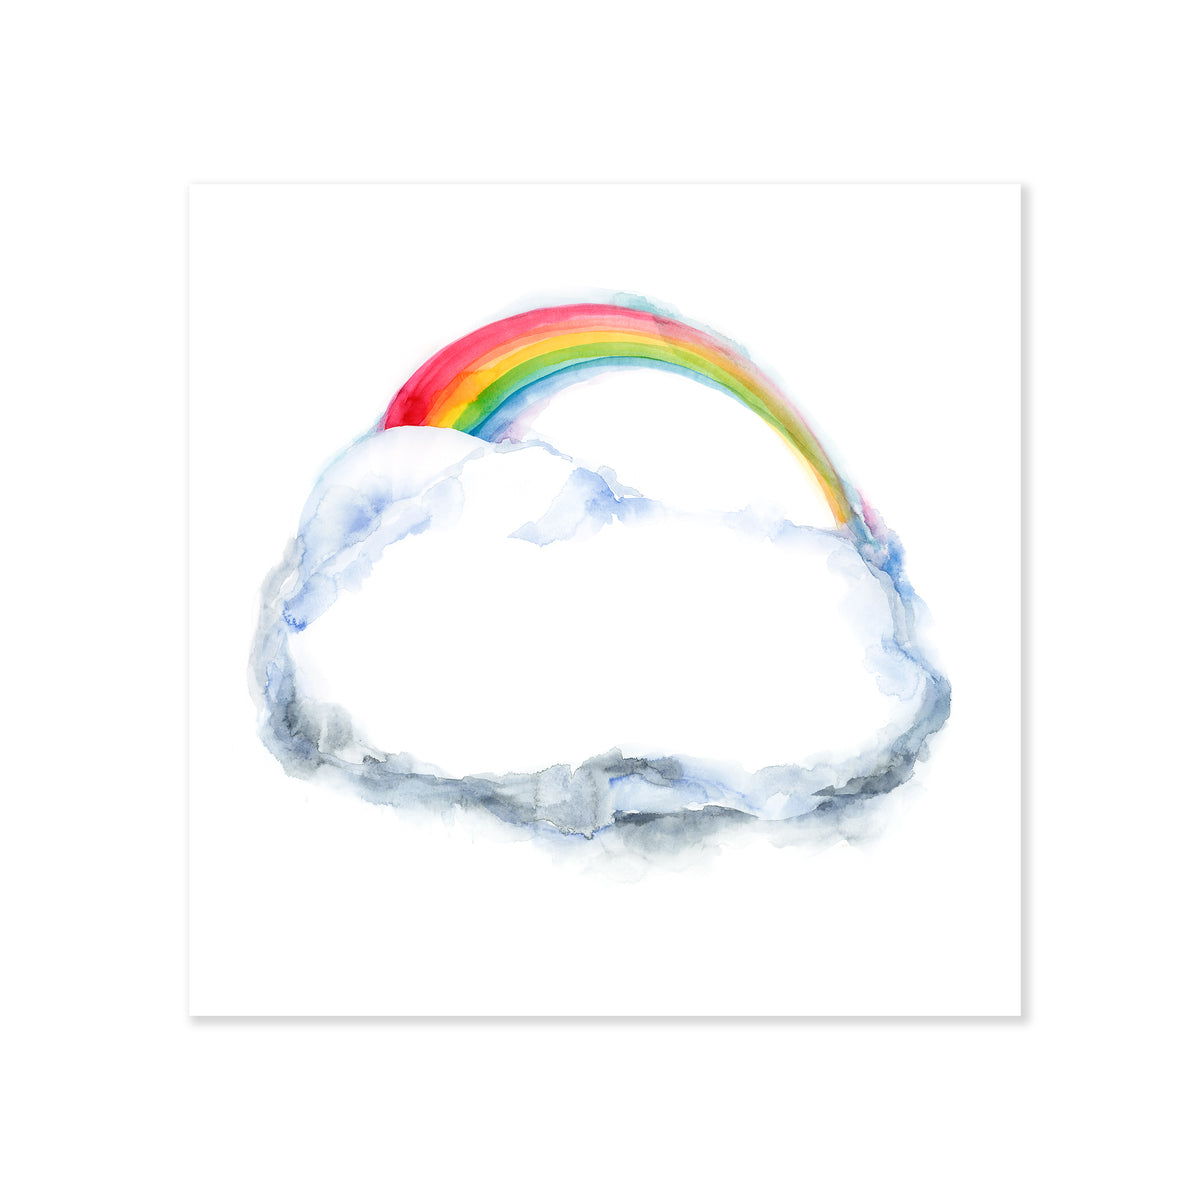 A fine art print illustrating a rainbow arch sitting on a large white cloud painted with watercolors on a soft white background